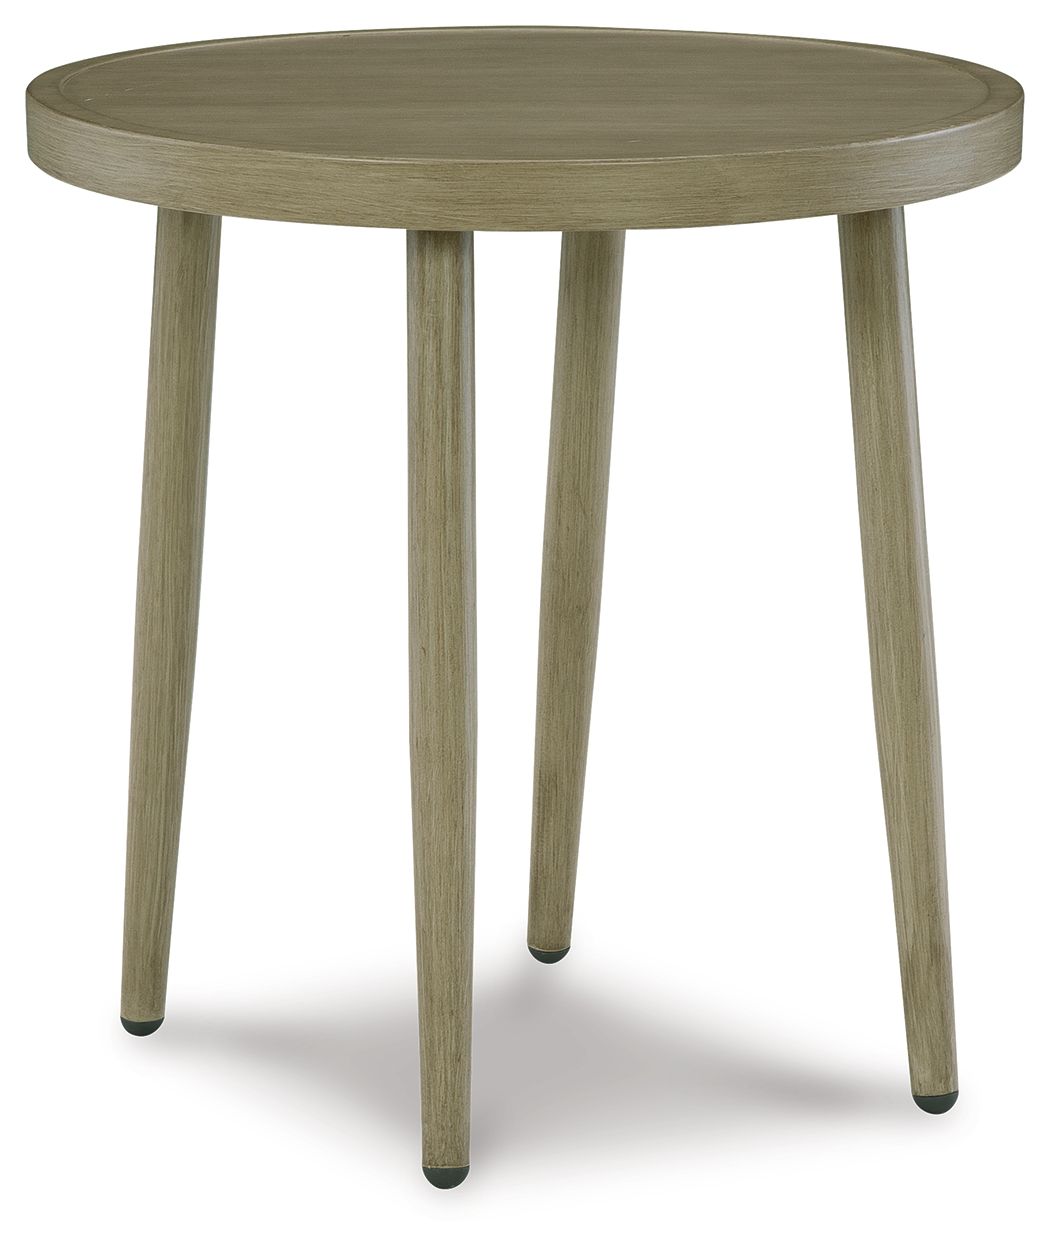 Swiss Valley - Beige - Round End Table Tony's Home Furnishings Furniture. Beds. Dressers. Sofas.